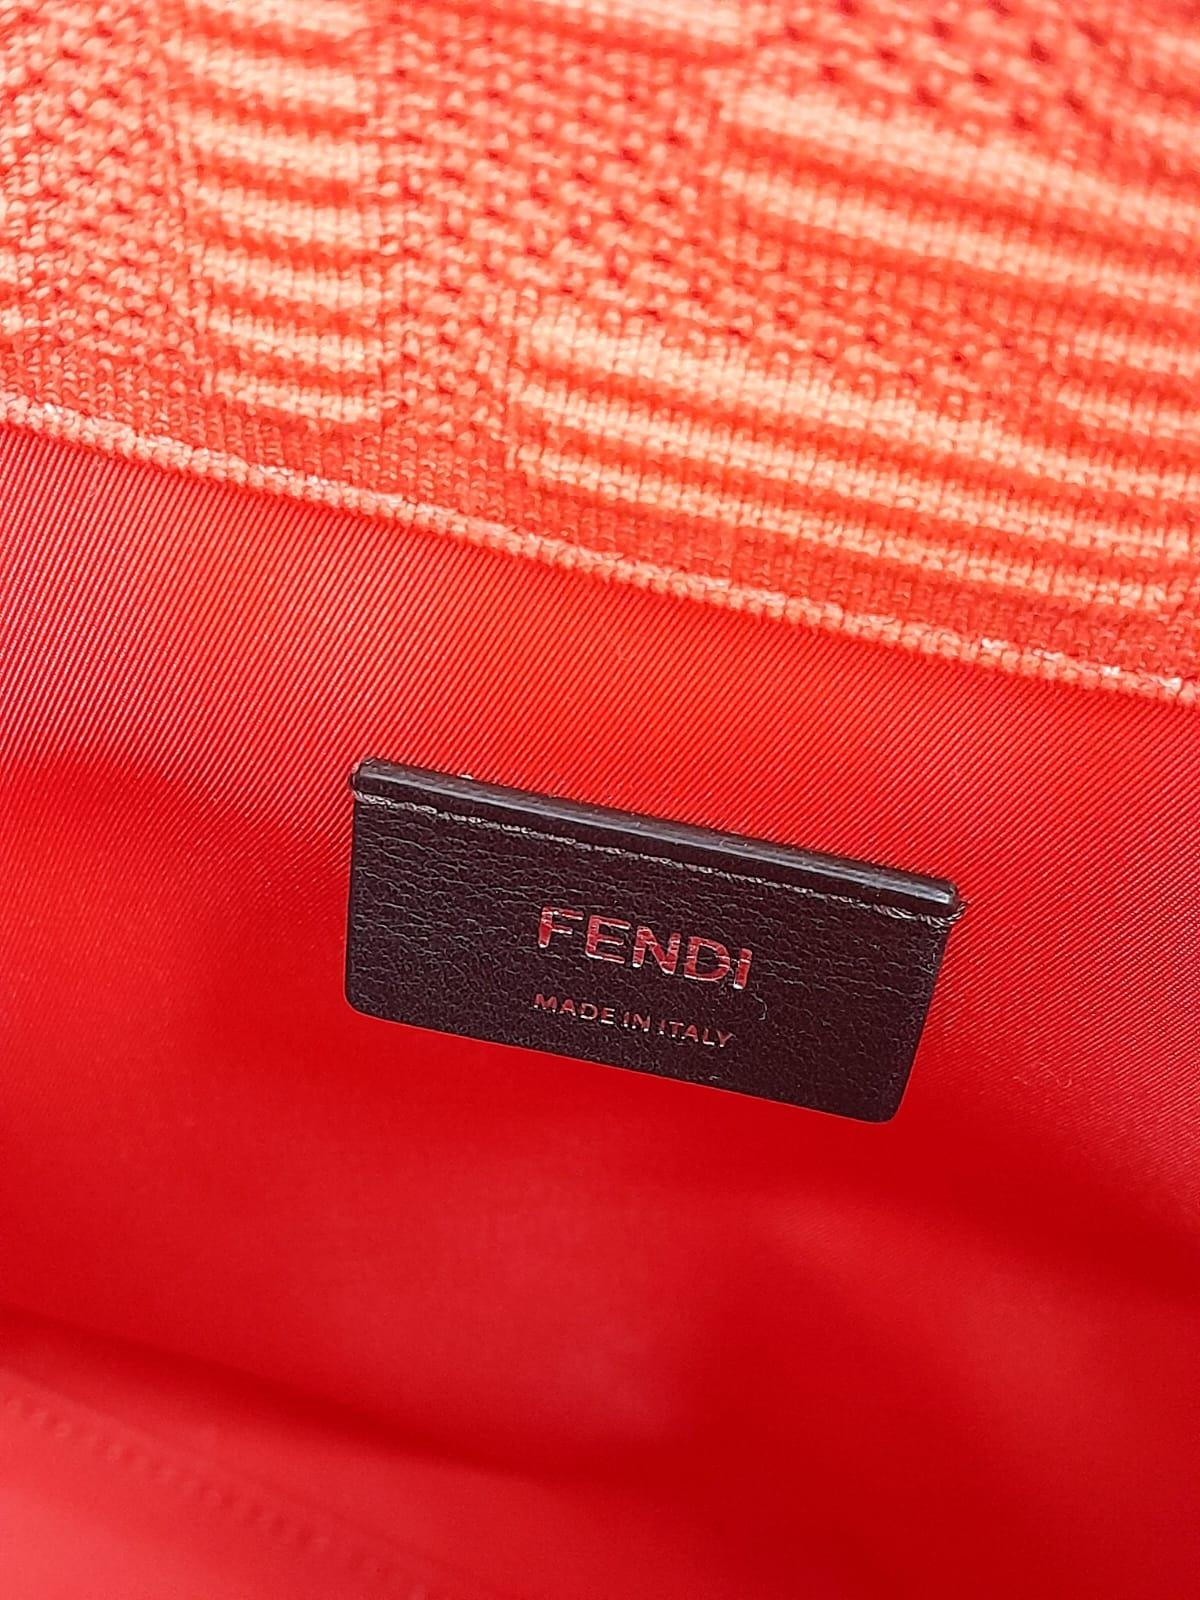 A Fendi Coral Sunshine Tote Bag. Textile exterior with leather trim, silver-toned hardware and two - Image 5 of 7